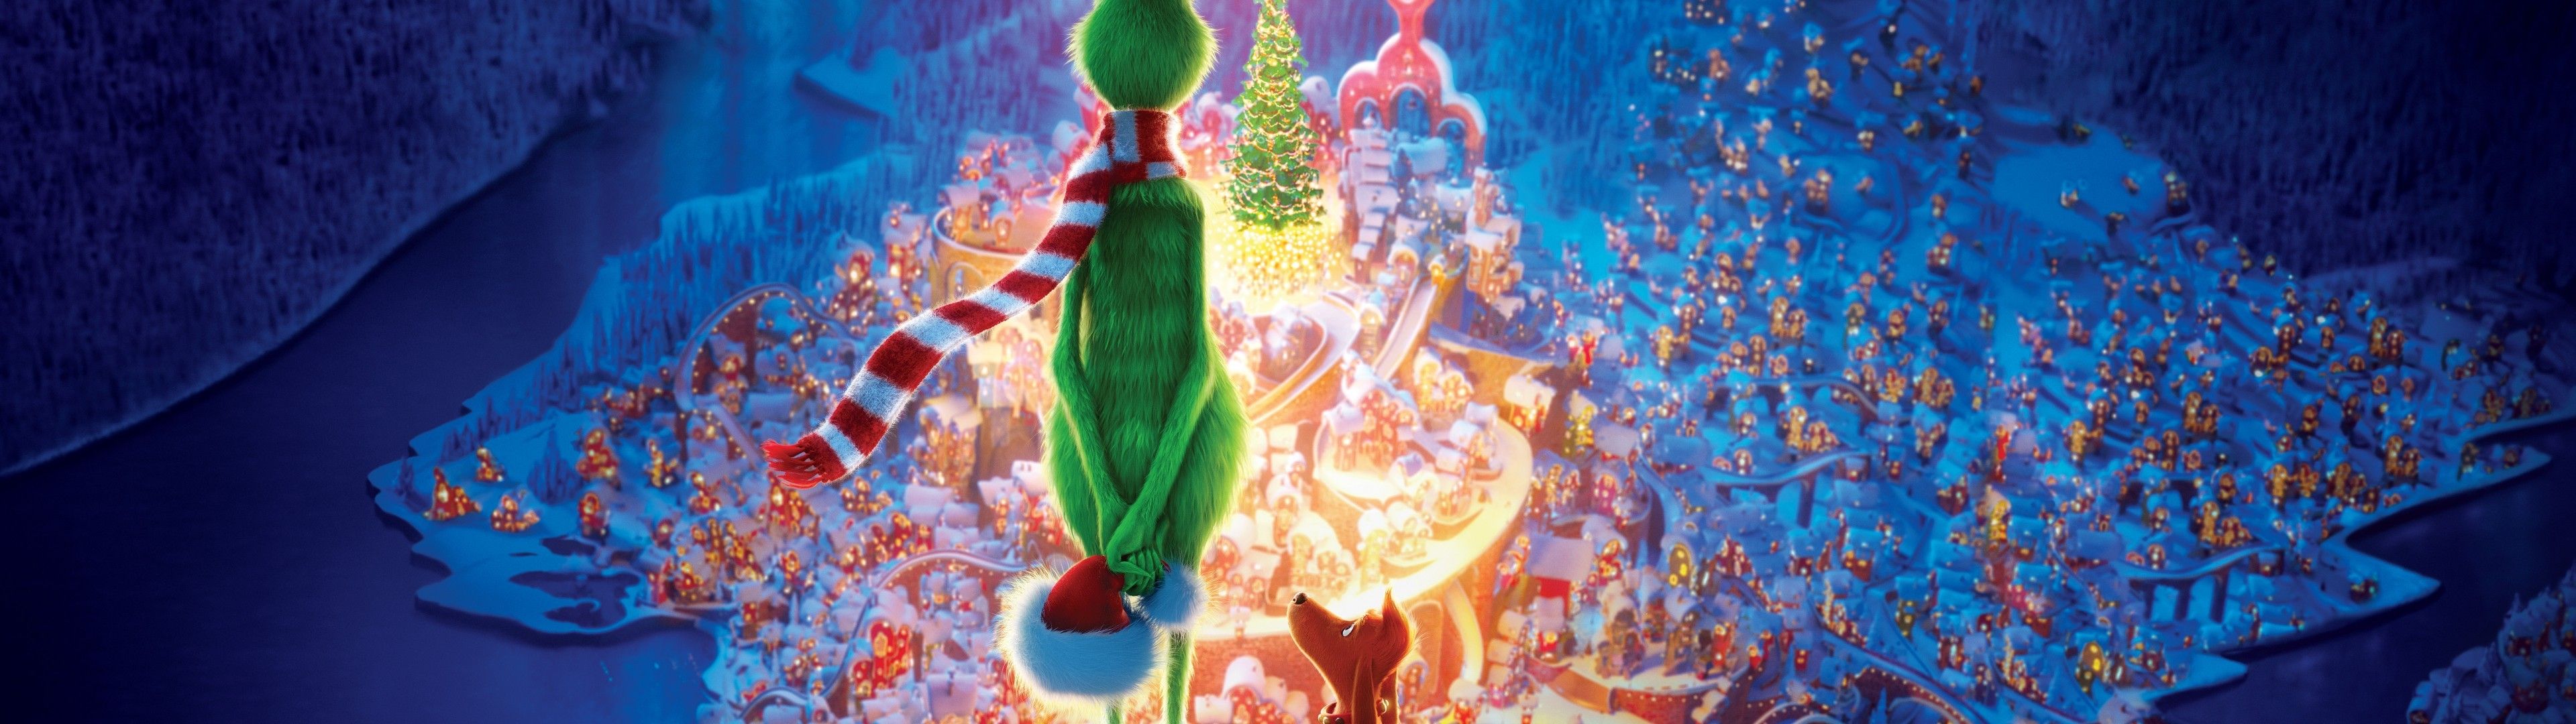 Download 3840x1080 The Grinch, Animation, Christmas Wallpaper